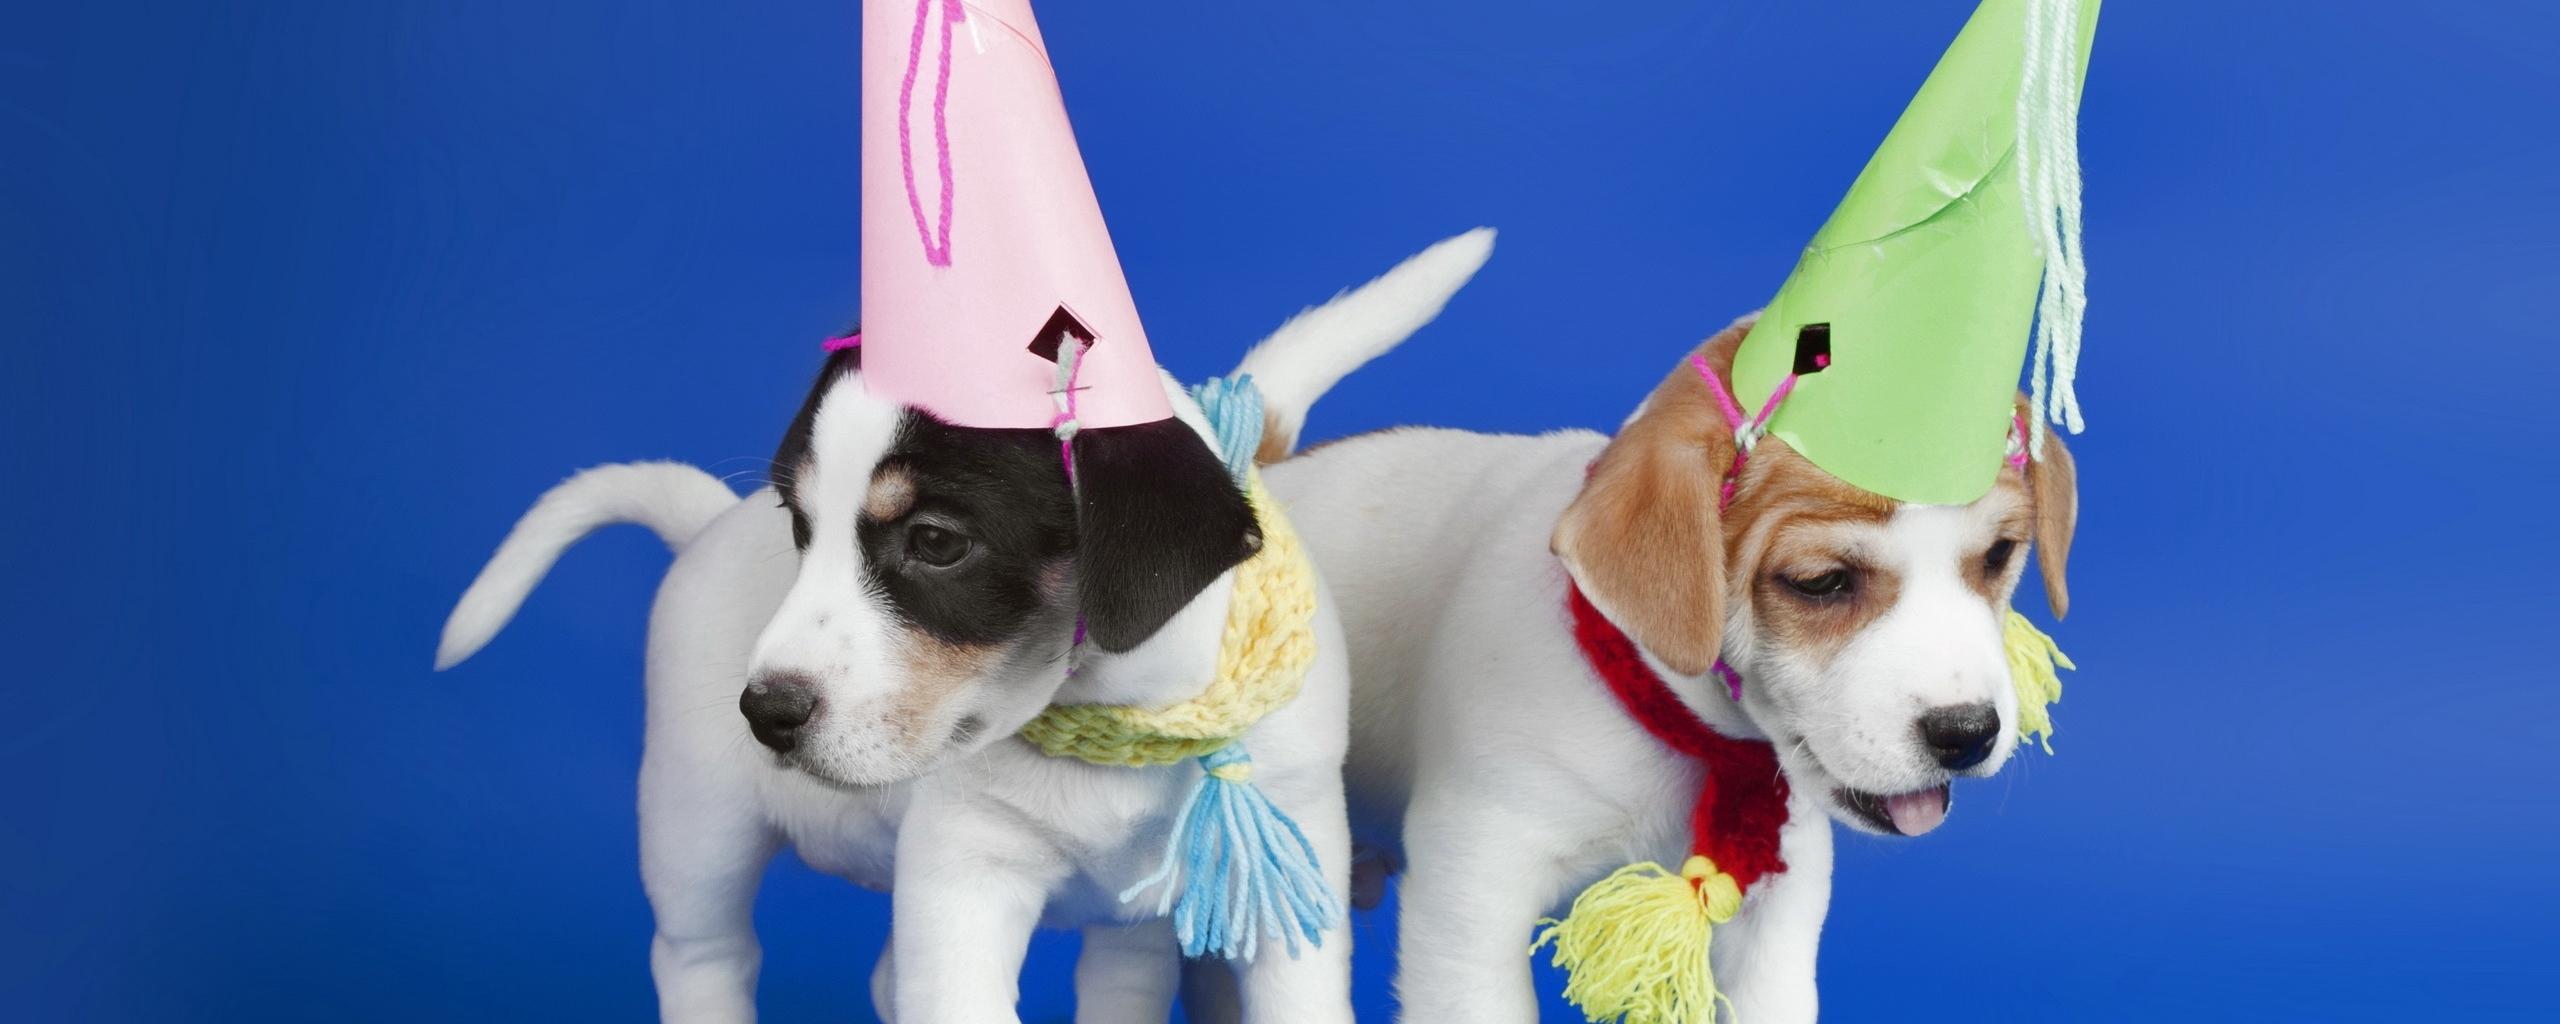 Download wallpaper 2560x1024 dogs, hoods, puppies, holiday